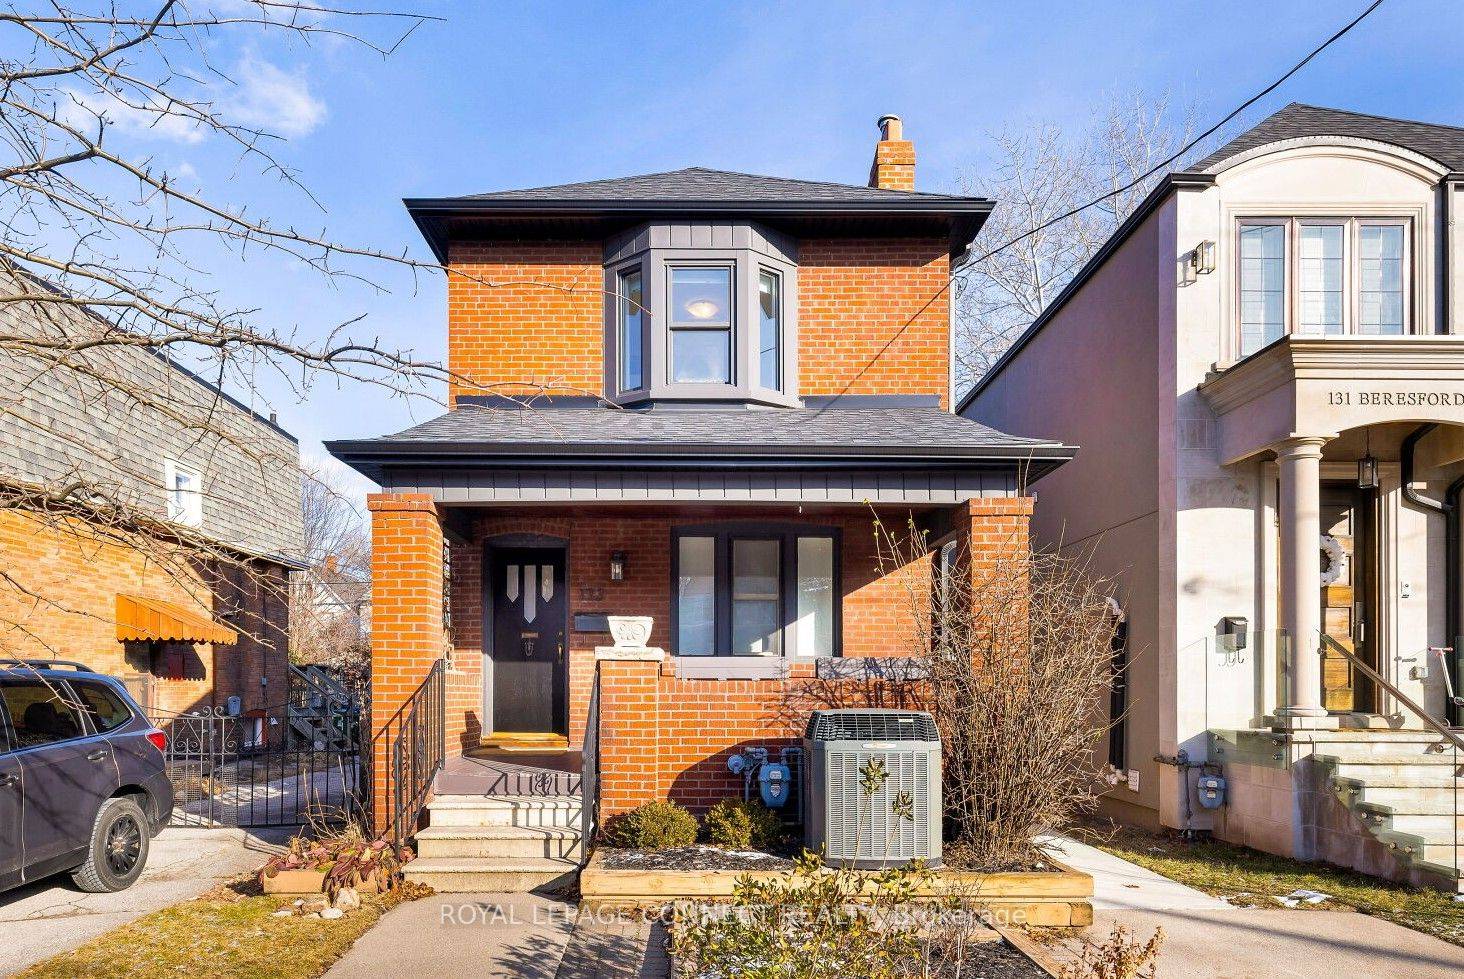 Renovated Swansea Gem ! Traditional 2 Storey Brick Detached on a Manicured 25' x 94.